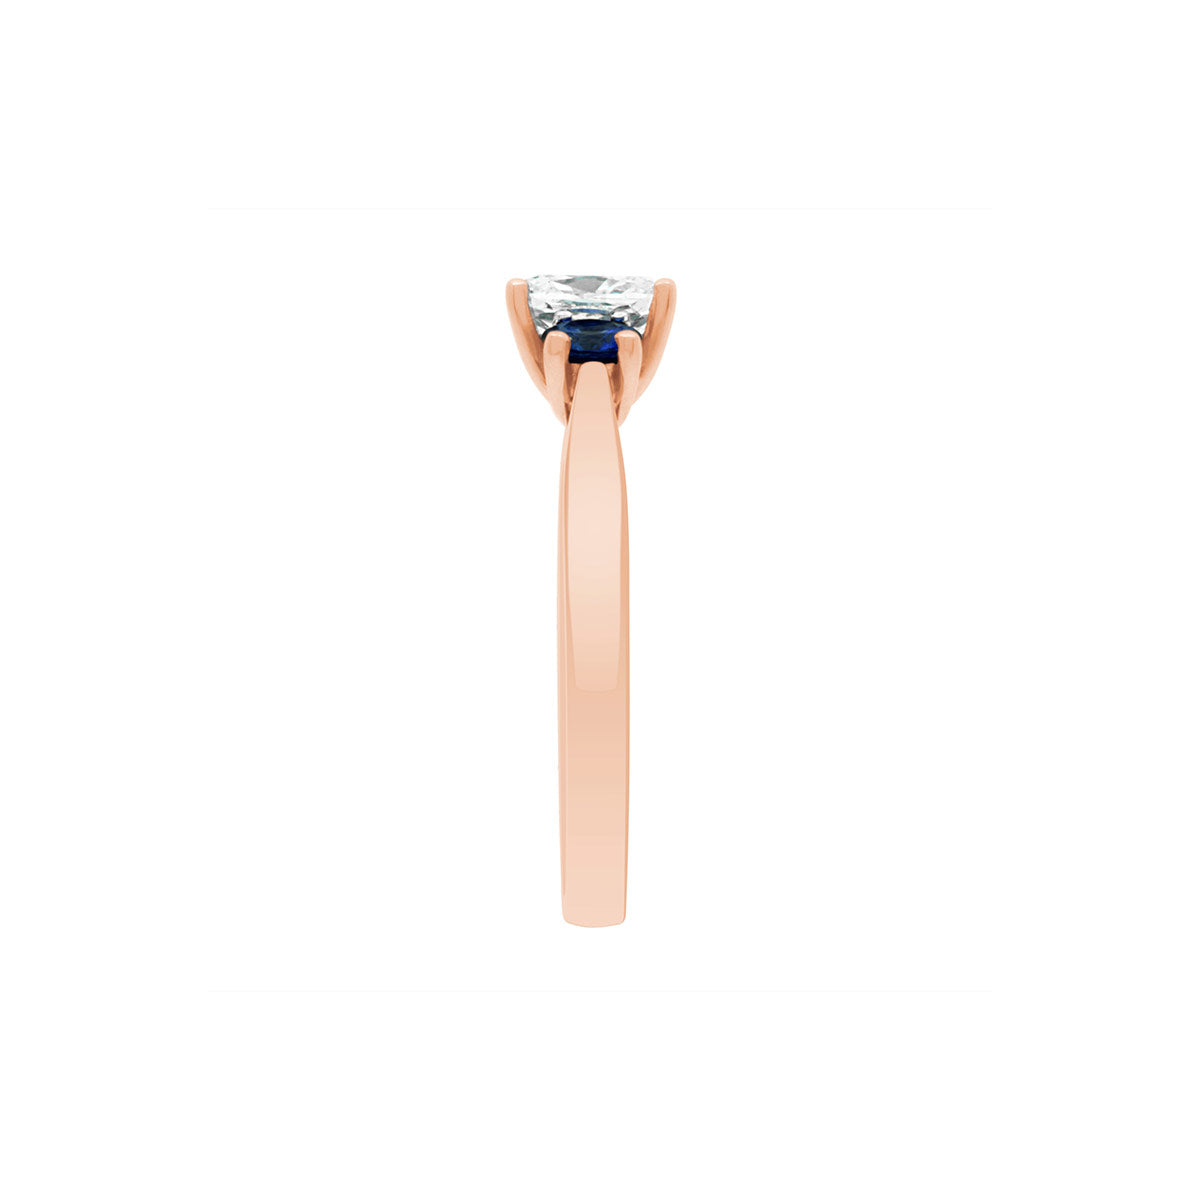 Diamond Sapphire Trilogy set in rose gold in an upright position from the side